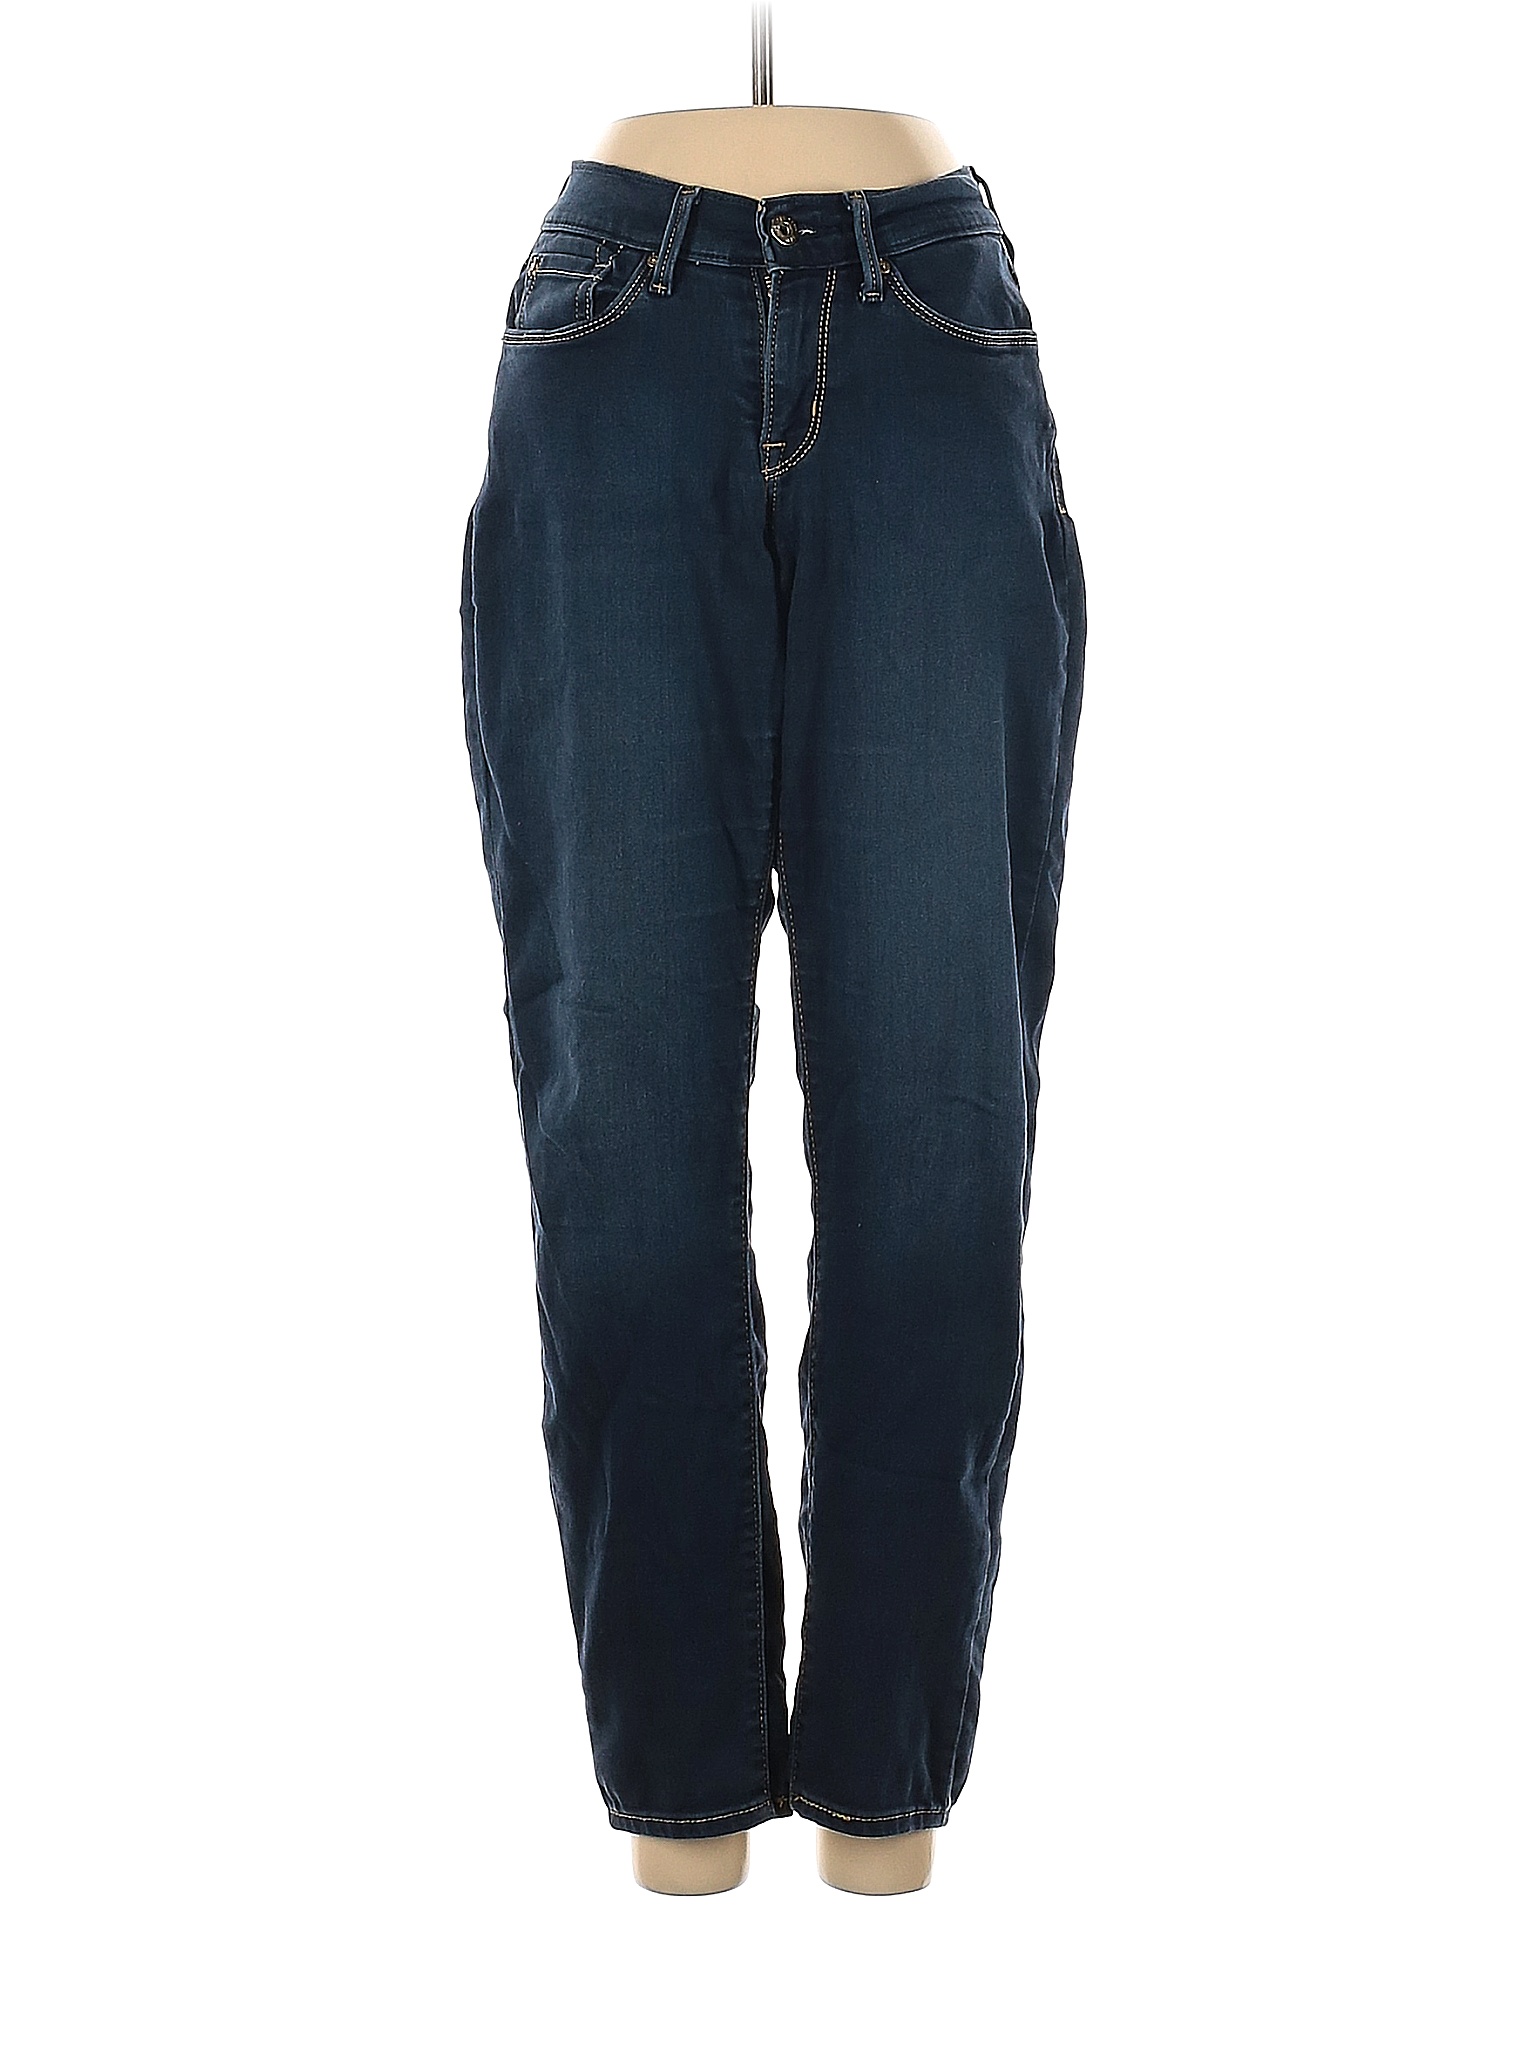 Denizen from Levi's Solid Blue Jeans Size 4 - 66% off | thredUP